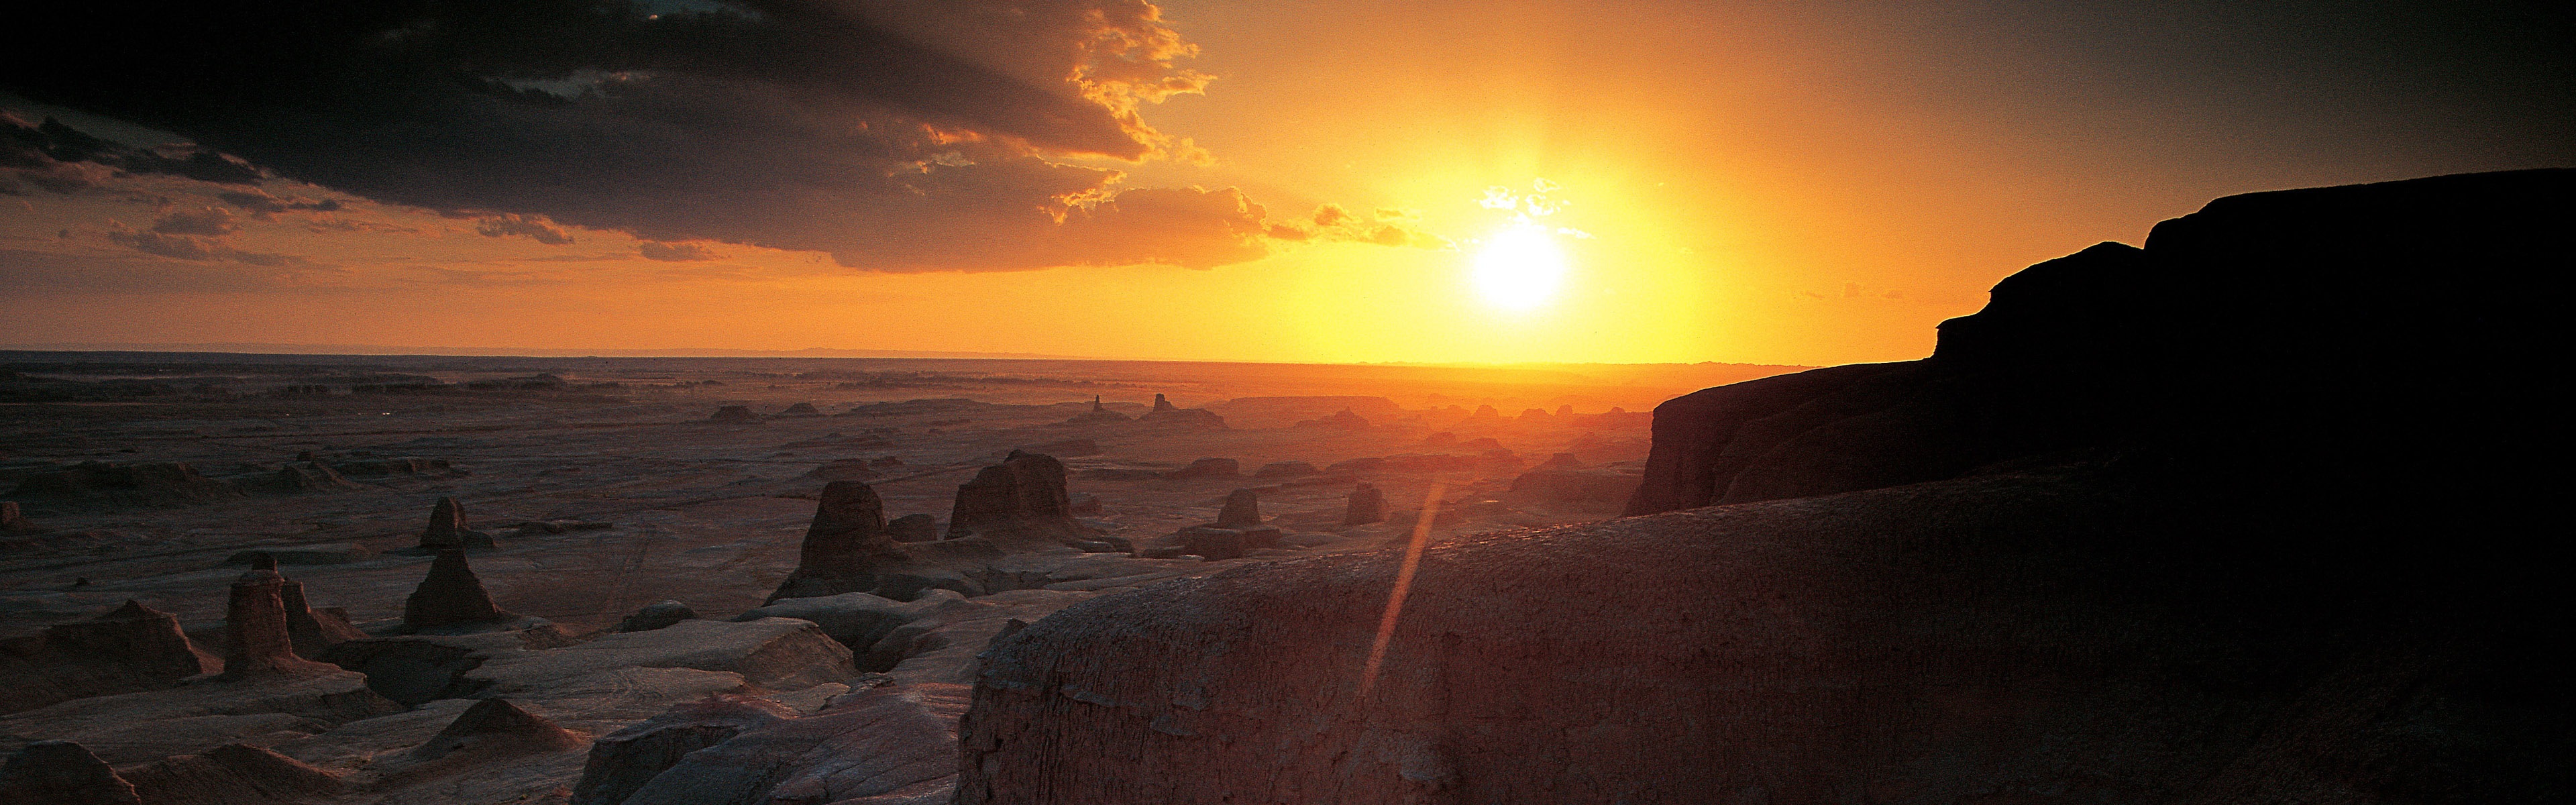 Hot and arid deserts, Windows 8 panoramic widescreen wallpapers #12 - 3840x1200